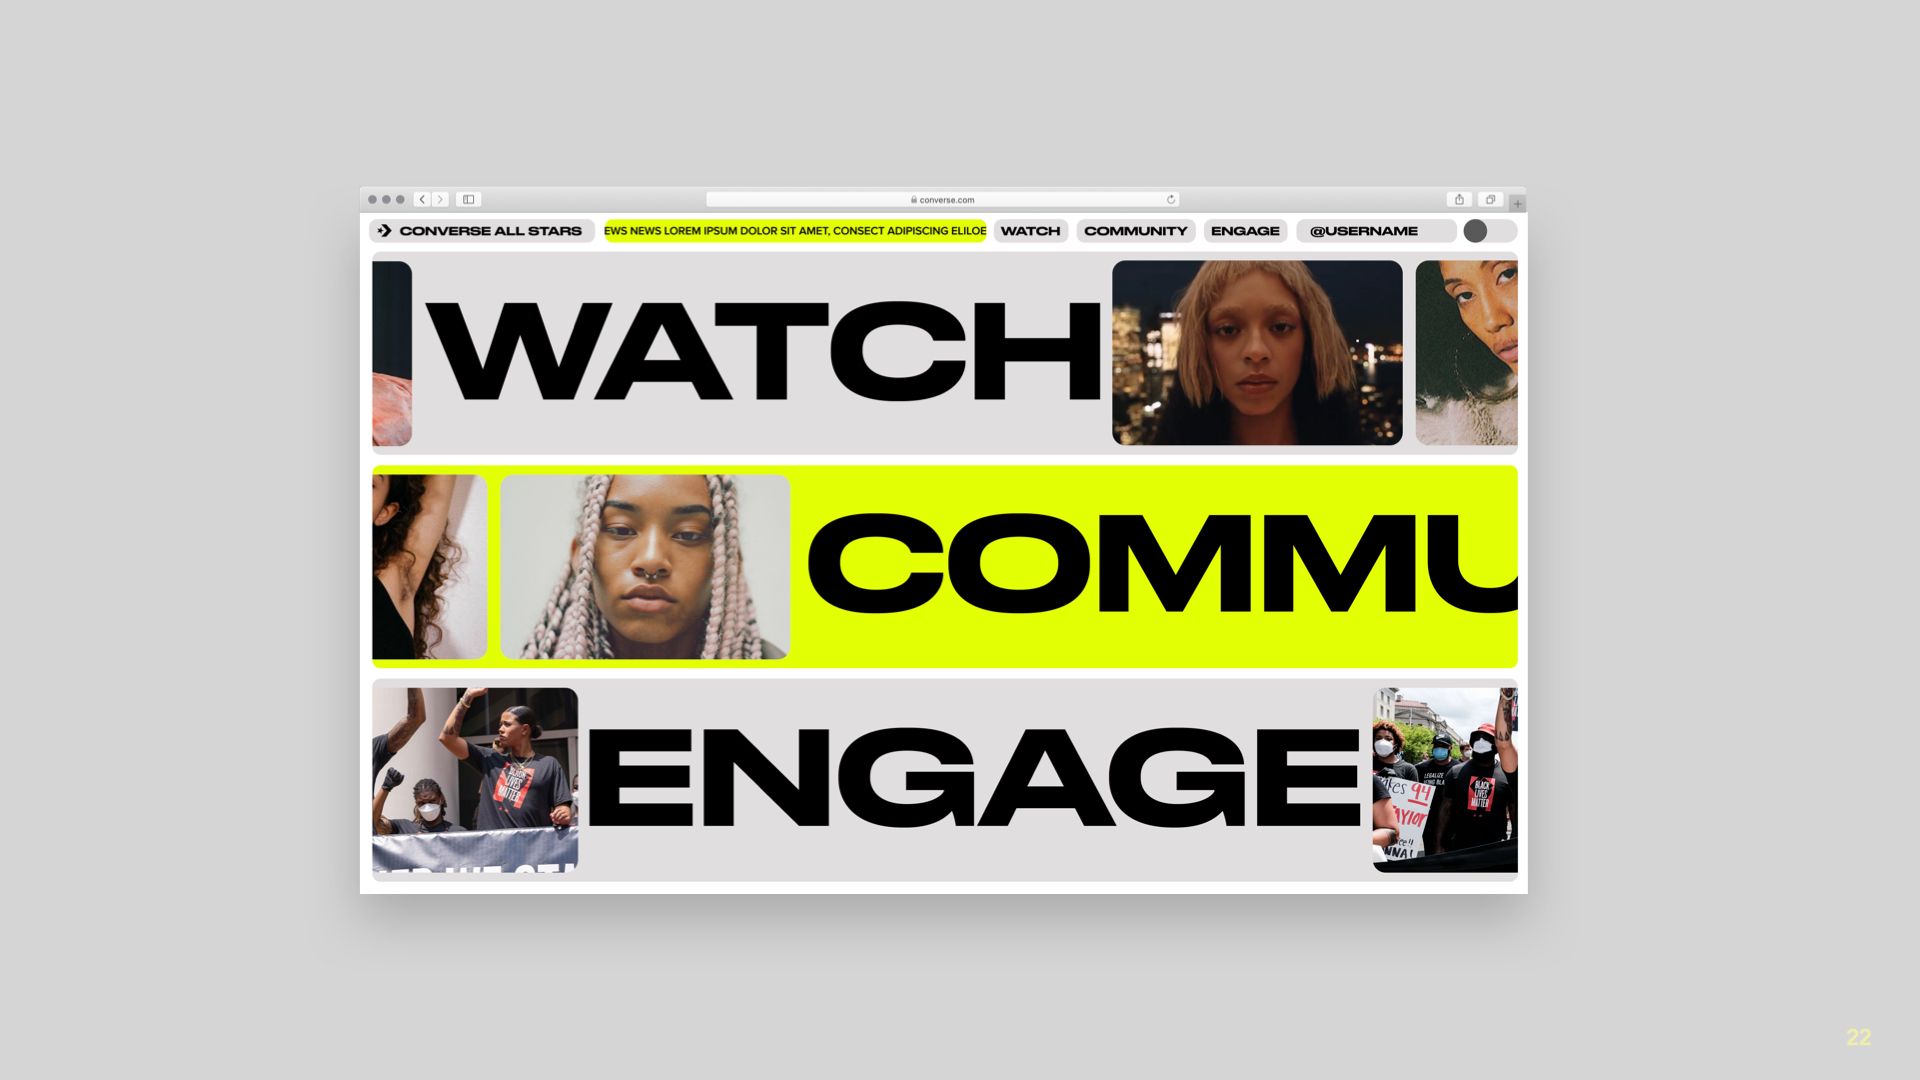 Screenshot of converse.com WATCH. COMMUNICATE. ENGAGE. in bold letters with people's faces